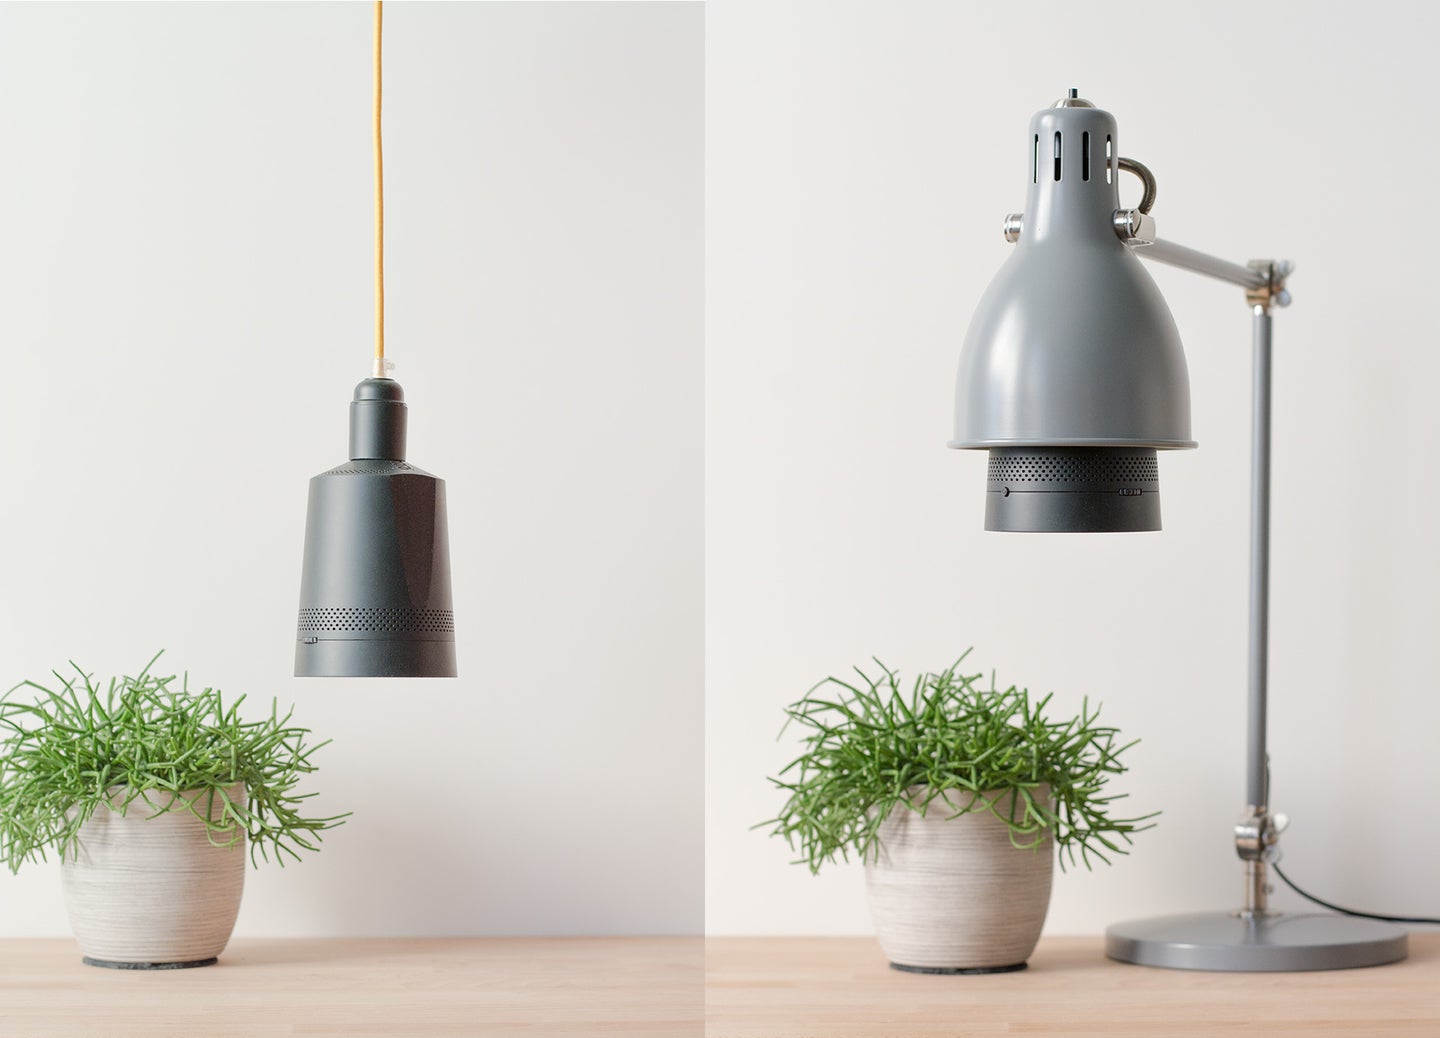 Beam Is A Projector Disguised As A Lamp